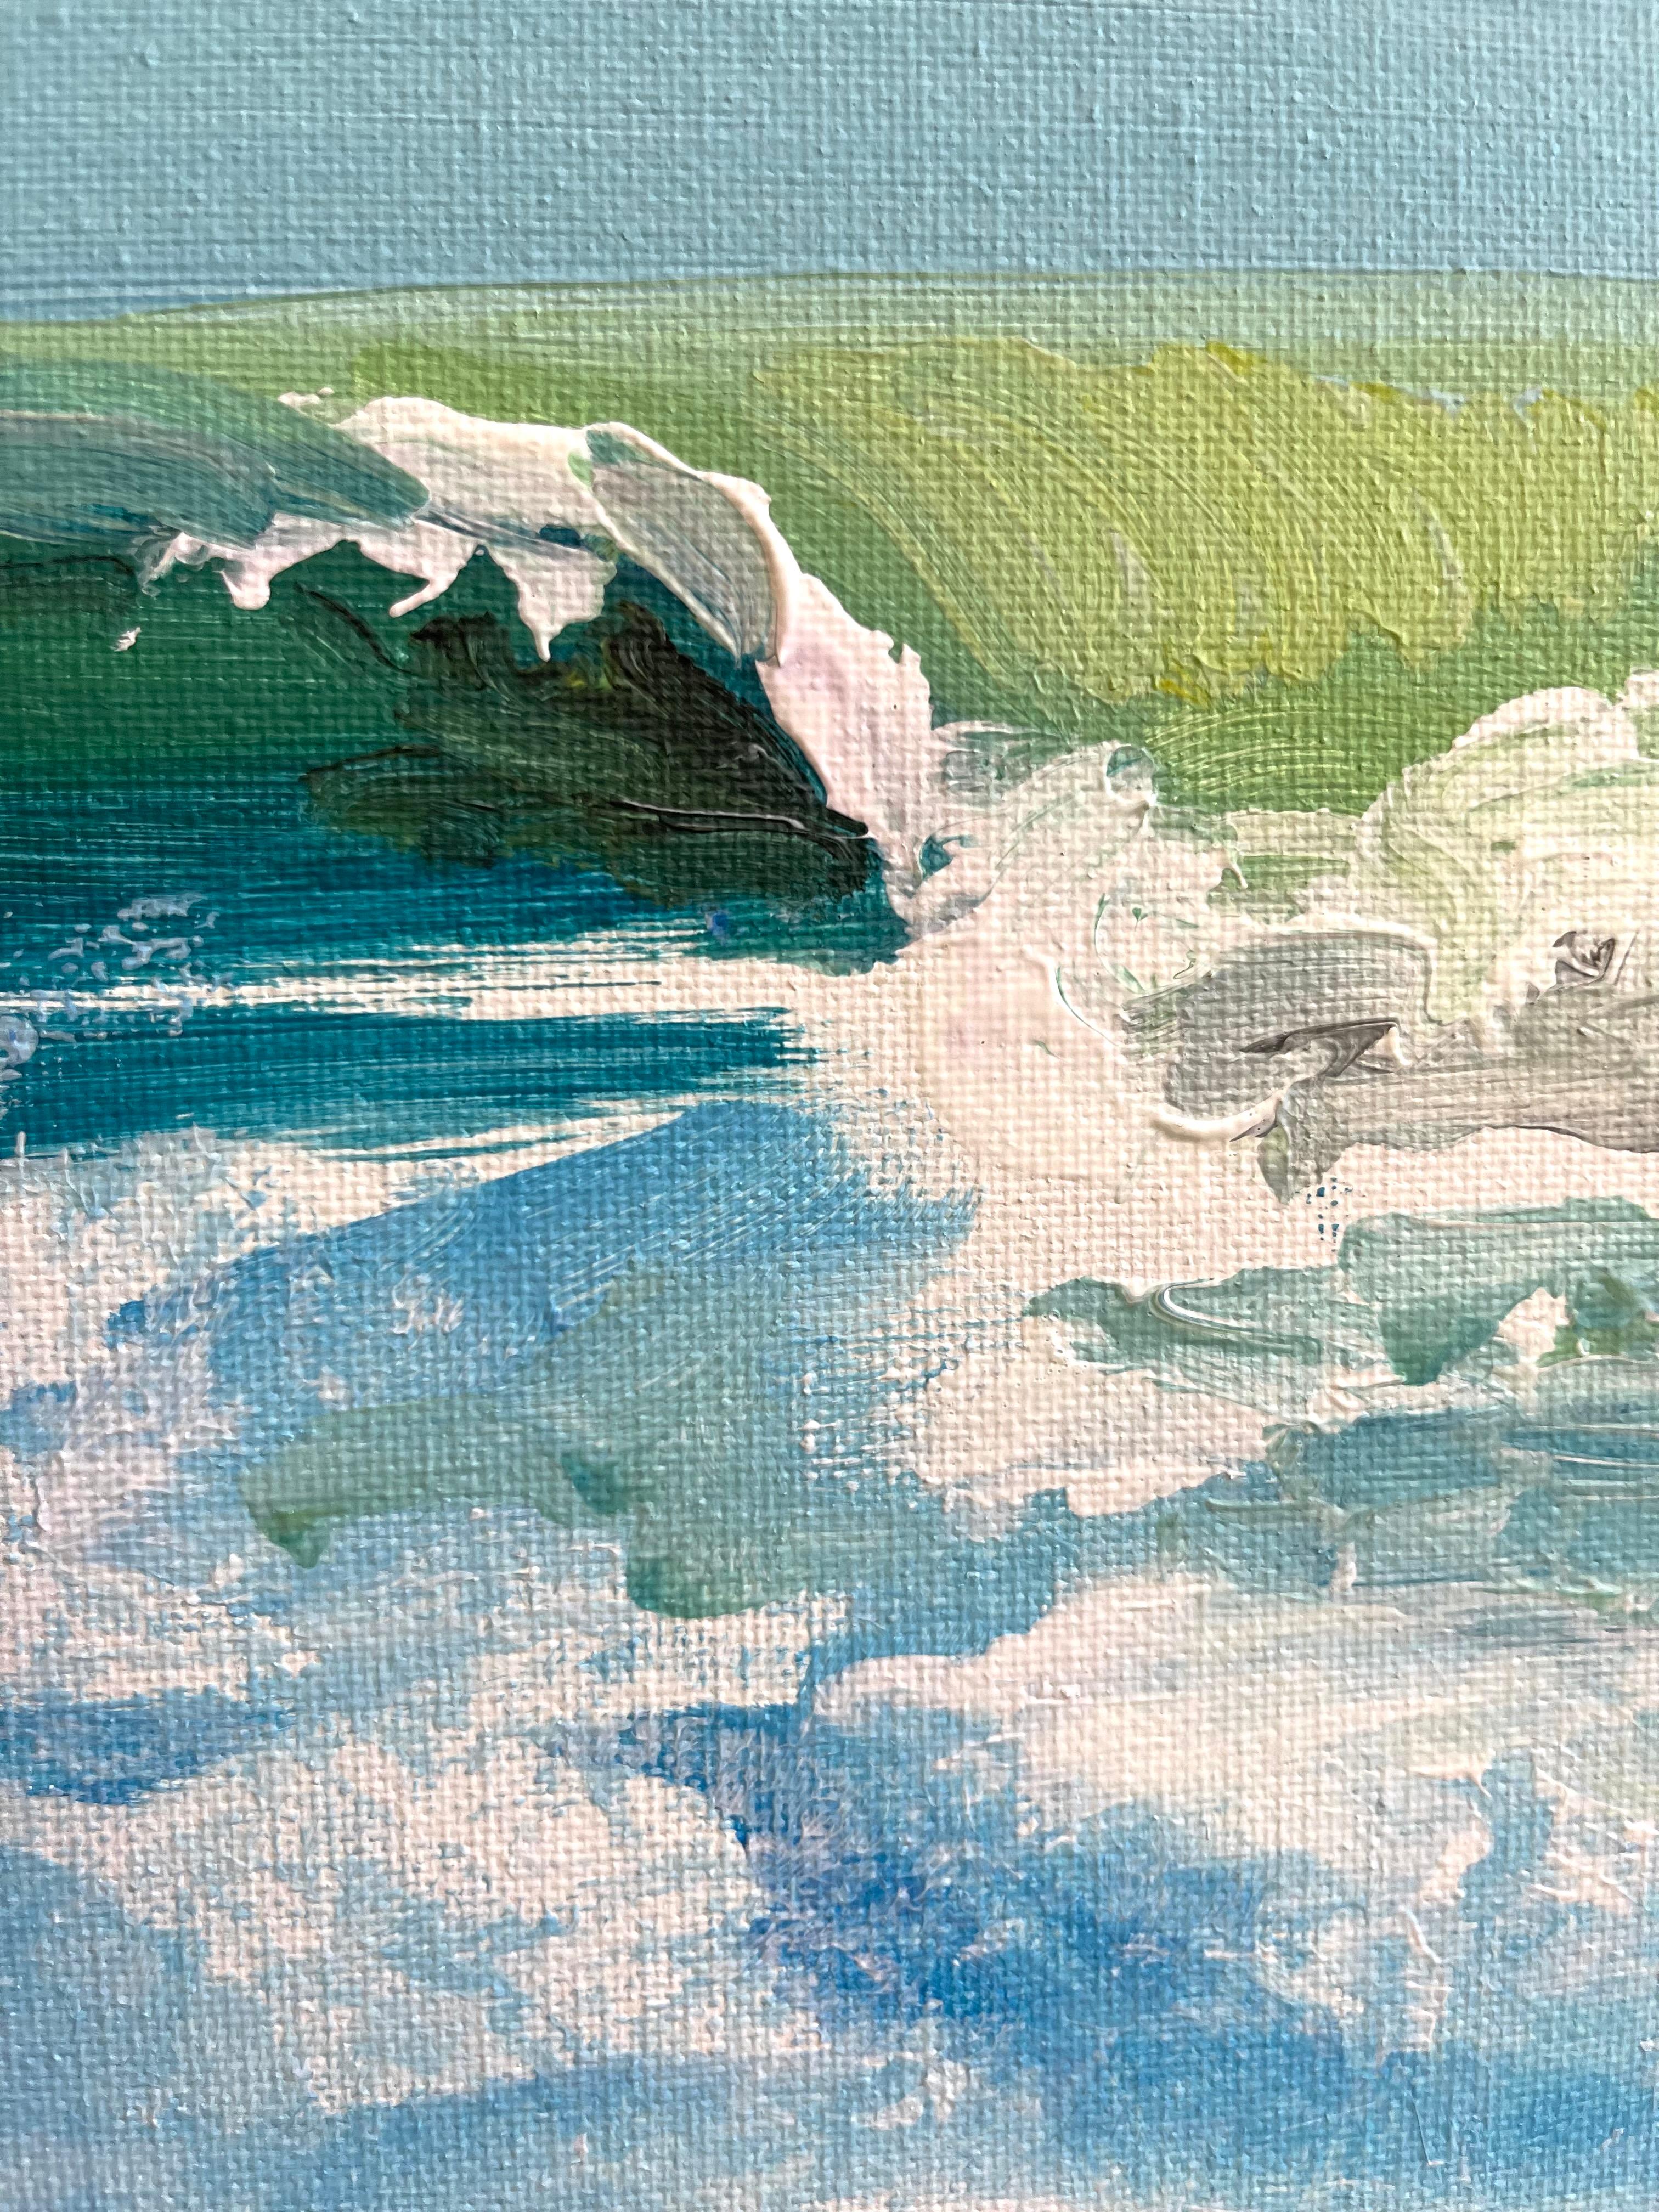 <p>Artist Comments<br>Artist Patricia Fabian captures a thrilling scene of a perfect pipeline cascading to the shore. The wave shines an emerald hue as the sunlight illuminates the water and crashes into white sea foam. Patricia paints in fresh